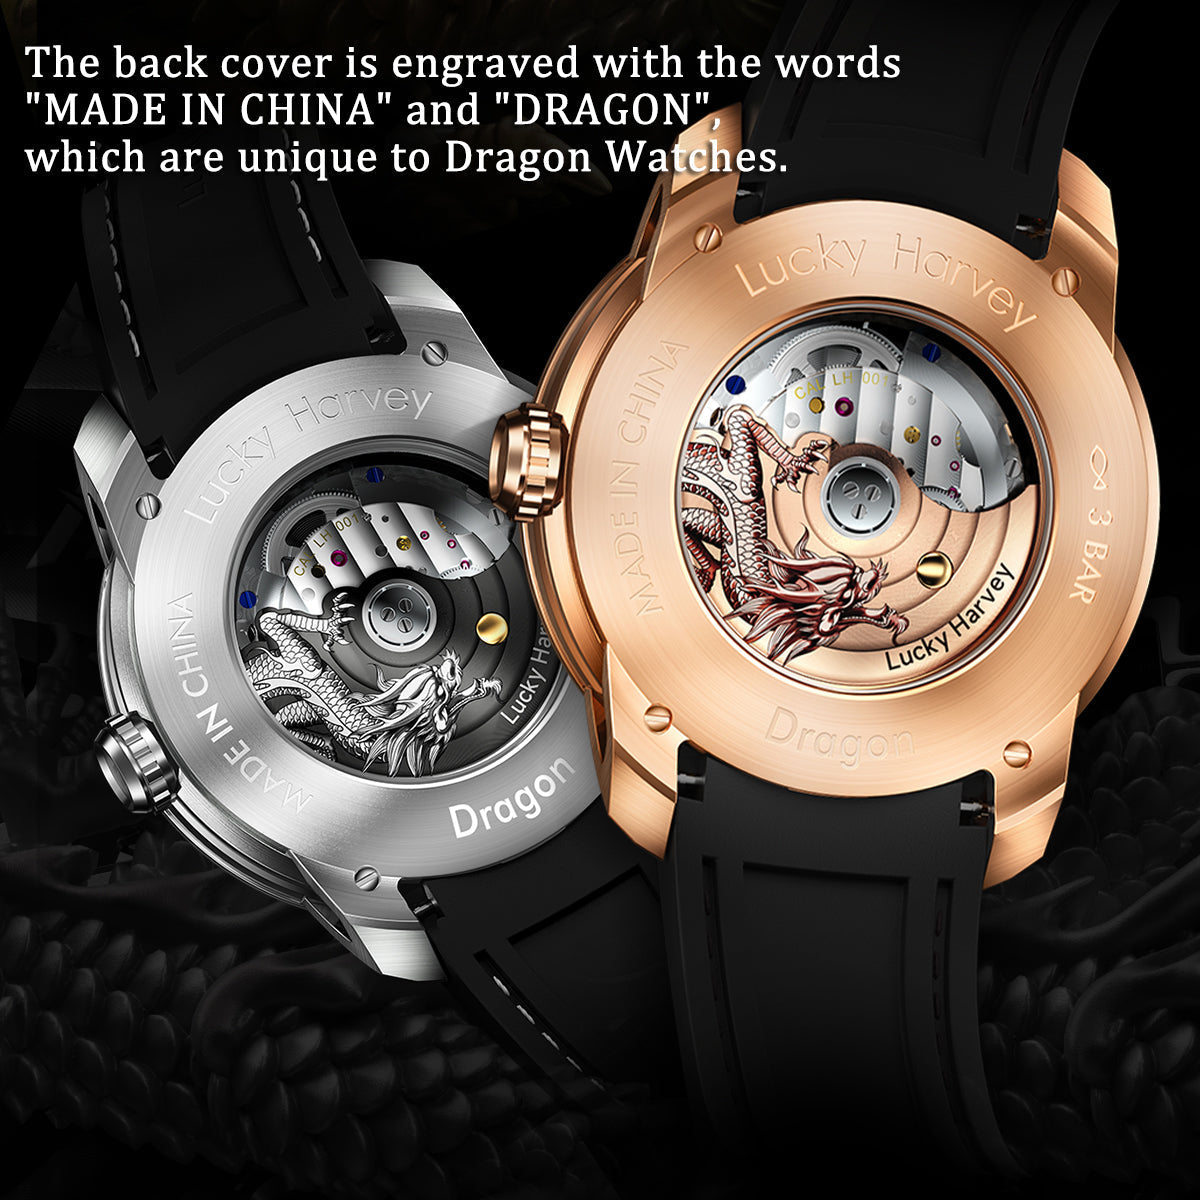 dragon back cover-The back cover is engraved with the words "MADE IN CHINA" and "DRAGON",which are unique to Dragon Watches.